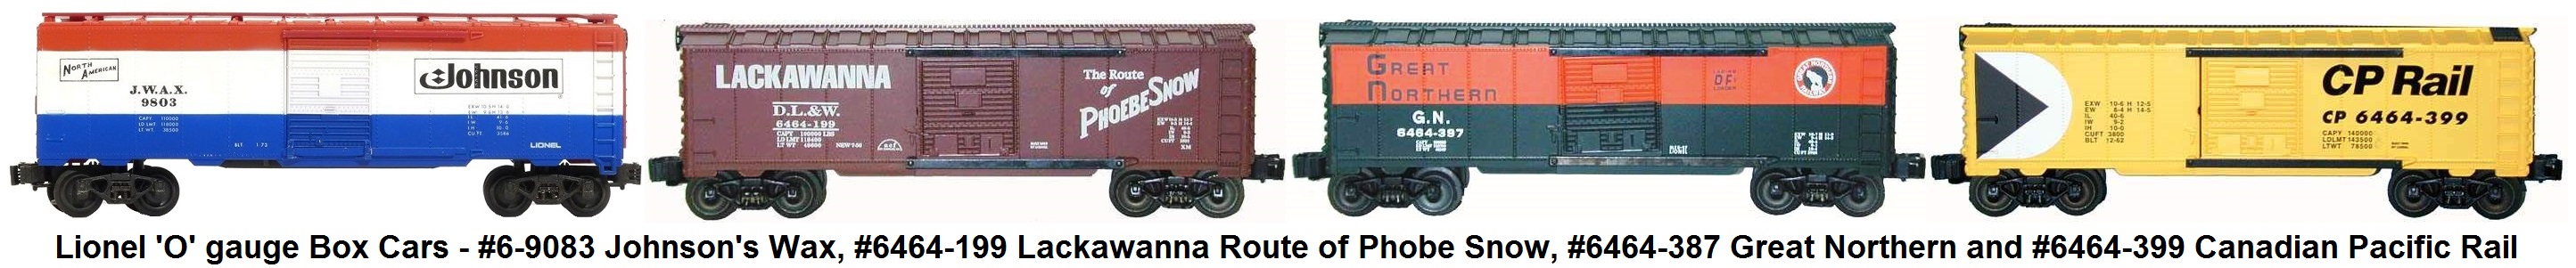 Lionel 'O' gauge #6-9083 Johnson's Wax, #6464-199 Lackawanna Route of Phoebe Snow, #6464-387 Great Northern and #6464-399 Canadian Pacific Rail Box Cars